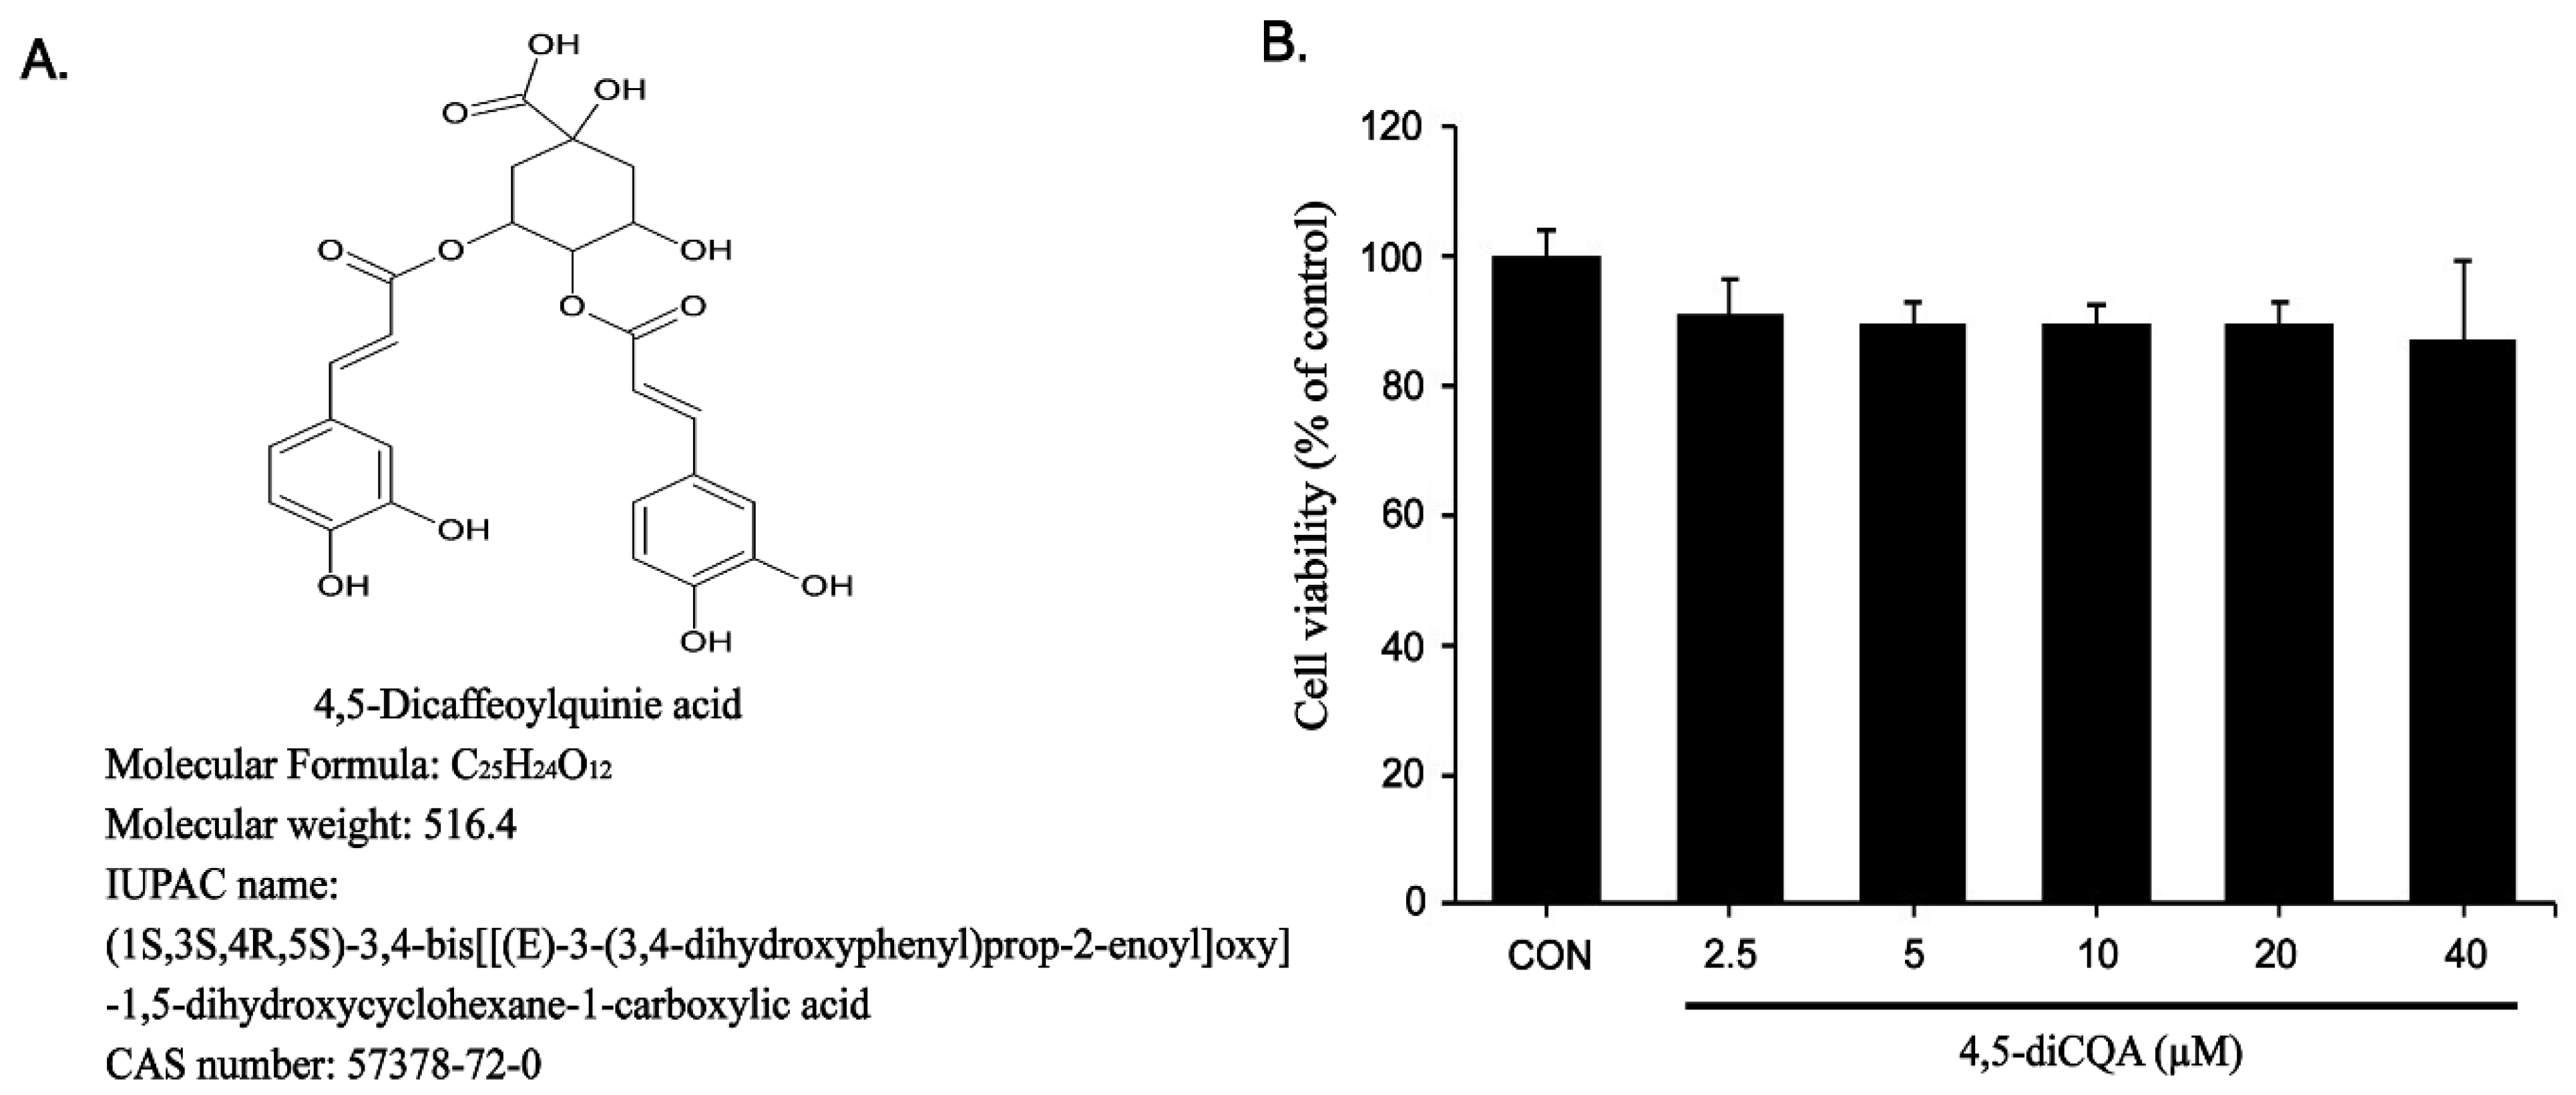 Inspiratie Wonen rechtop Nutrients | Free Full-Text | Anti-Inflammatory Effect of  4,5-Dicaffeoylquinic Acid on RAW264.7 Cells and a Rat Model of Inflammation